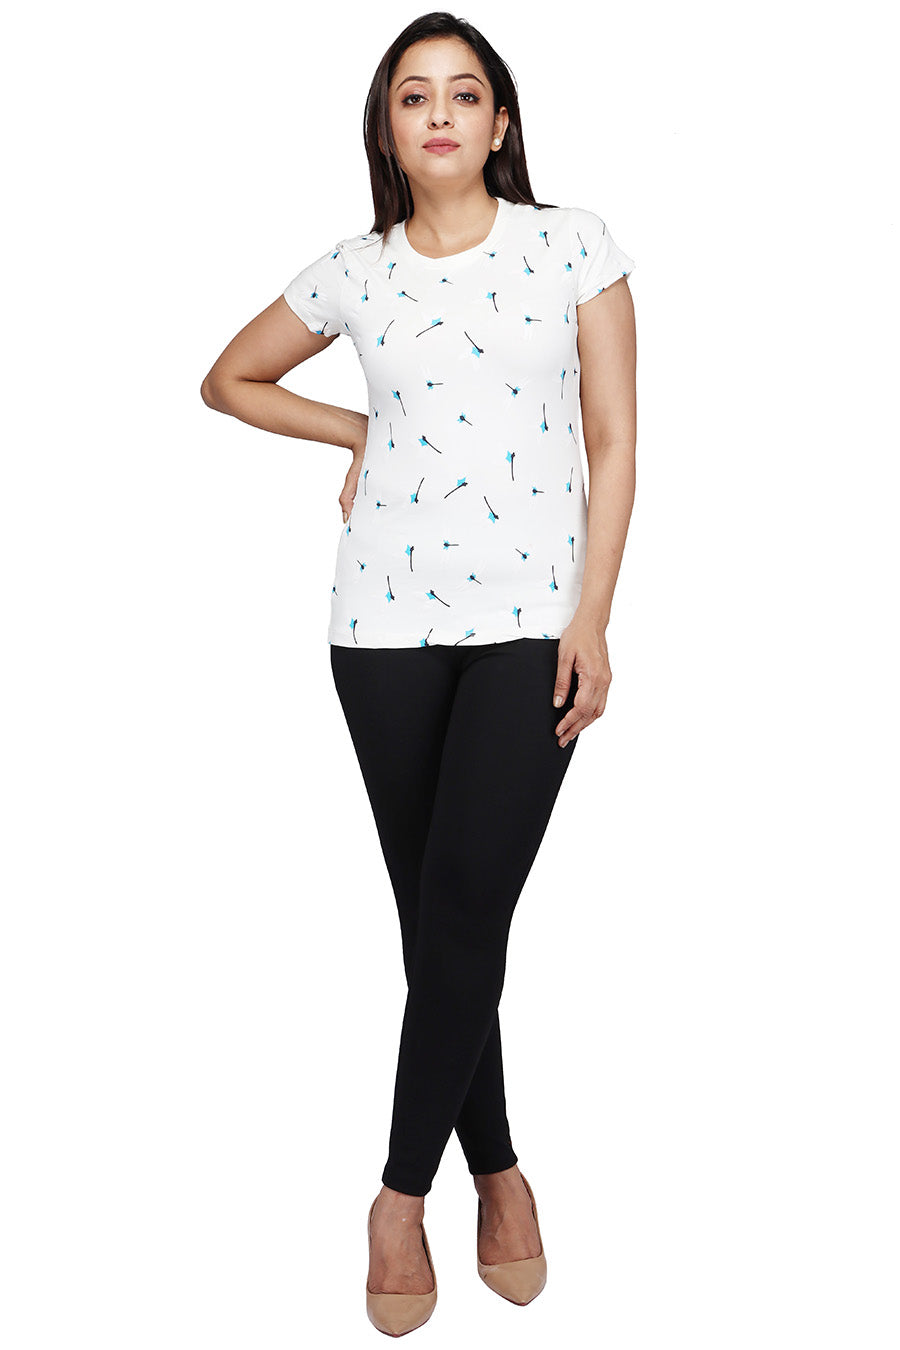 Comfort Lady All Over Printed Half Sleeve Cotton Round Neck T-Shirt